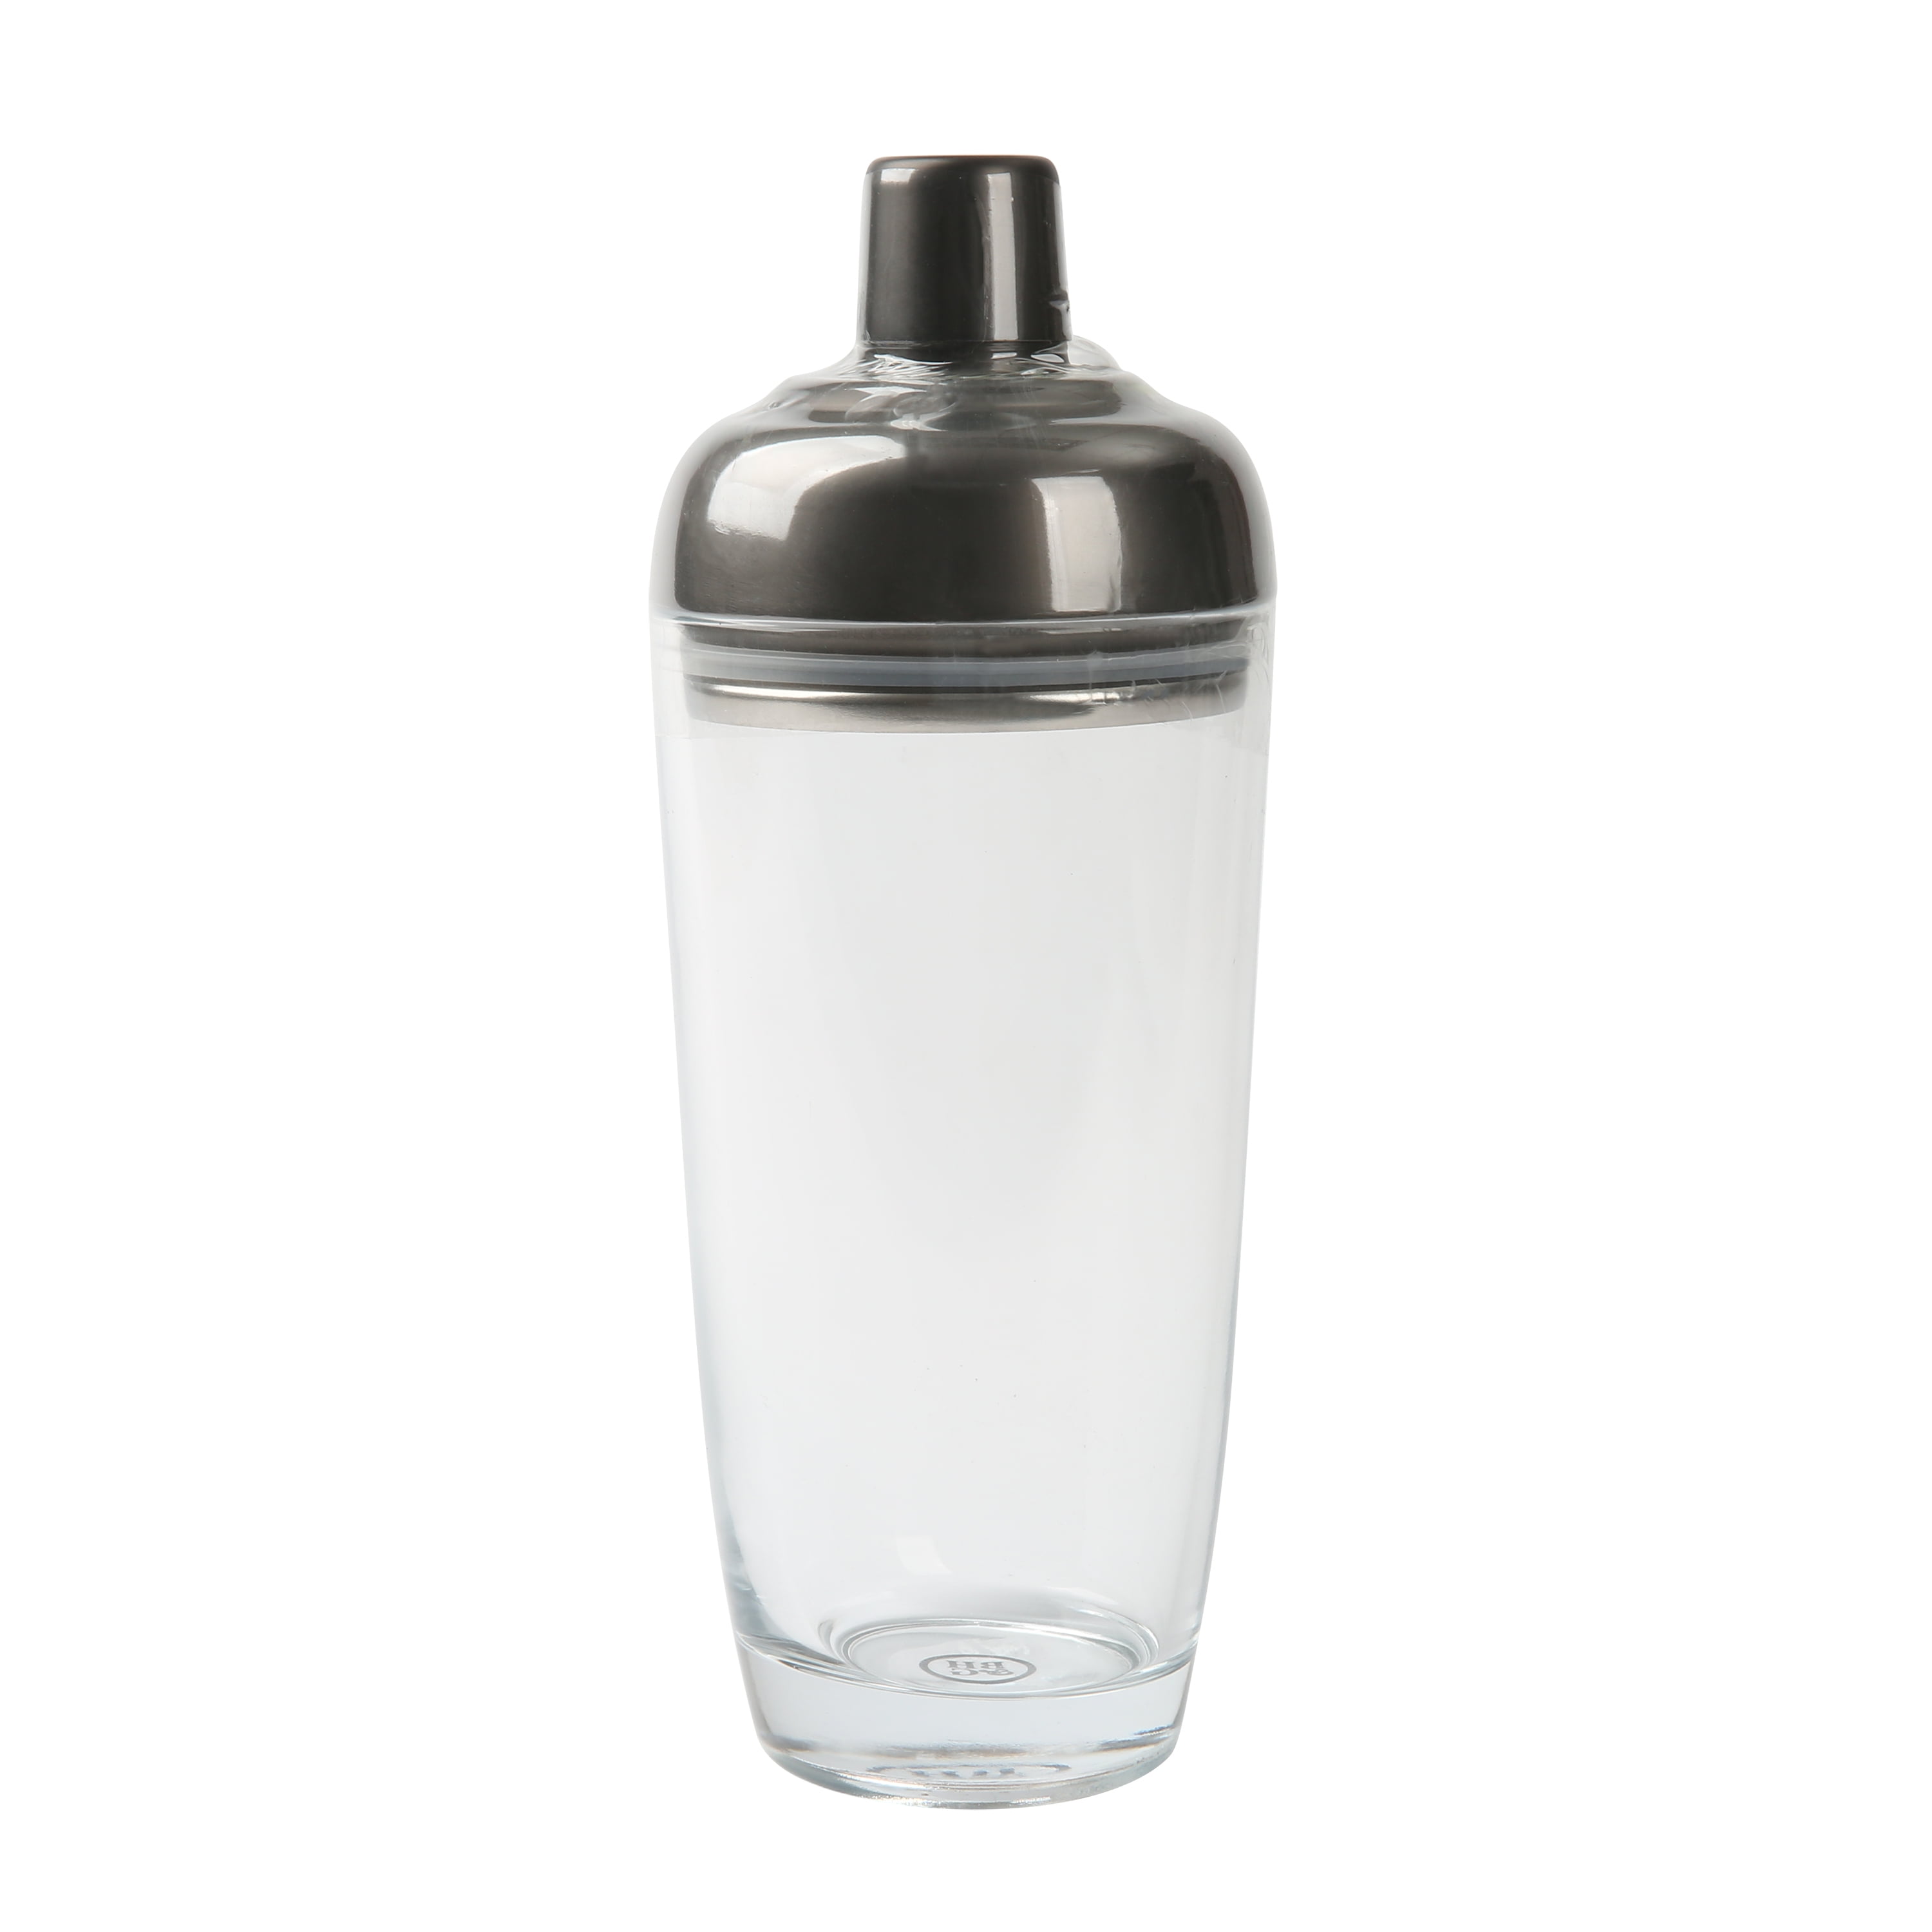 Better Homes & Gardens 23oz Stainless Steel and Glass Clear Cocktail Shaker